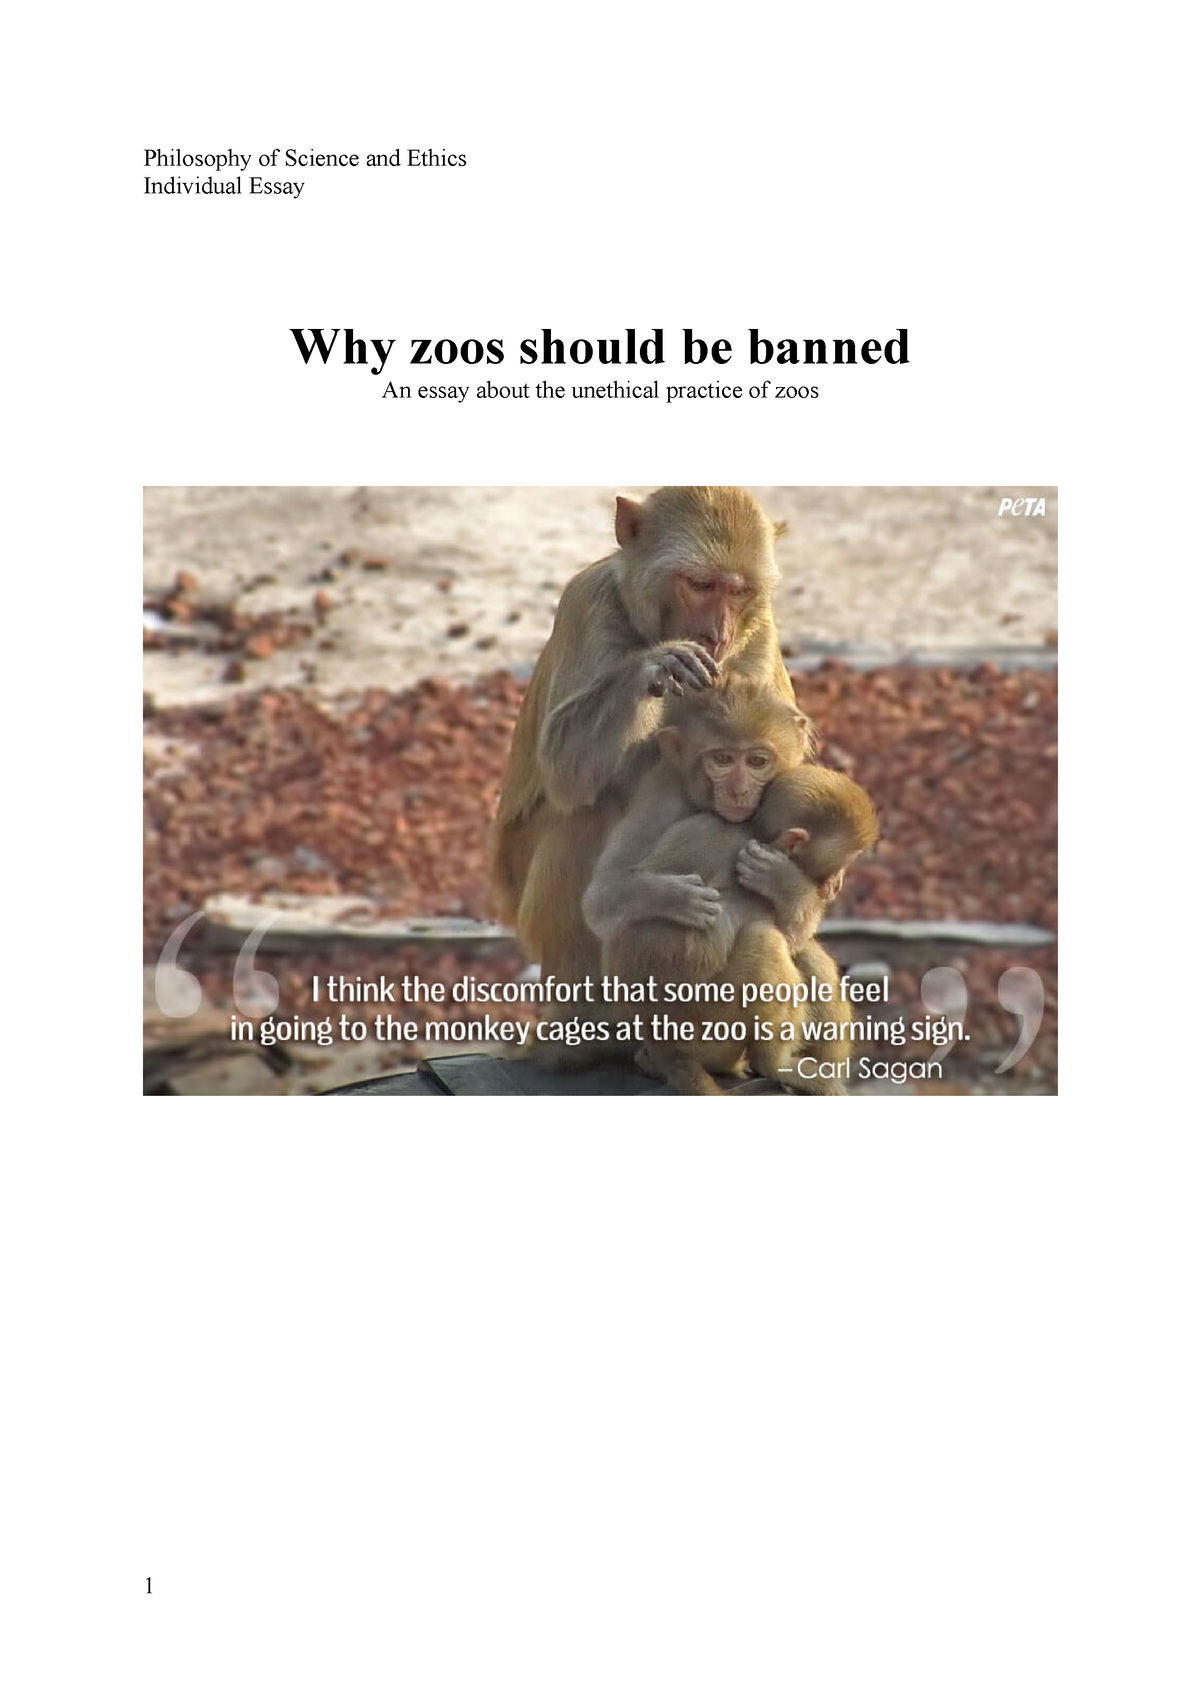 essay on zoos should be banned